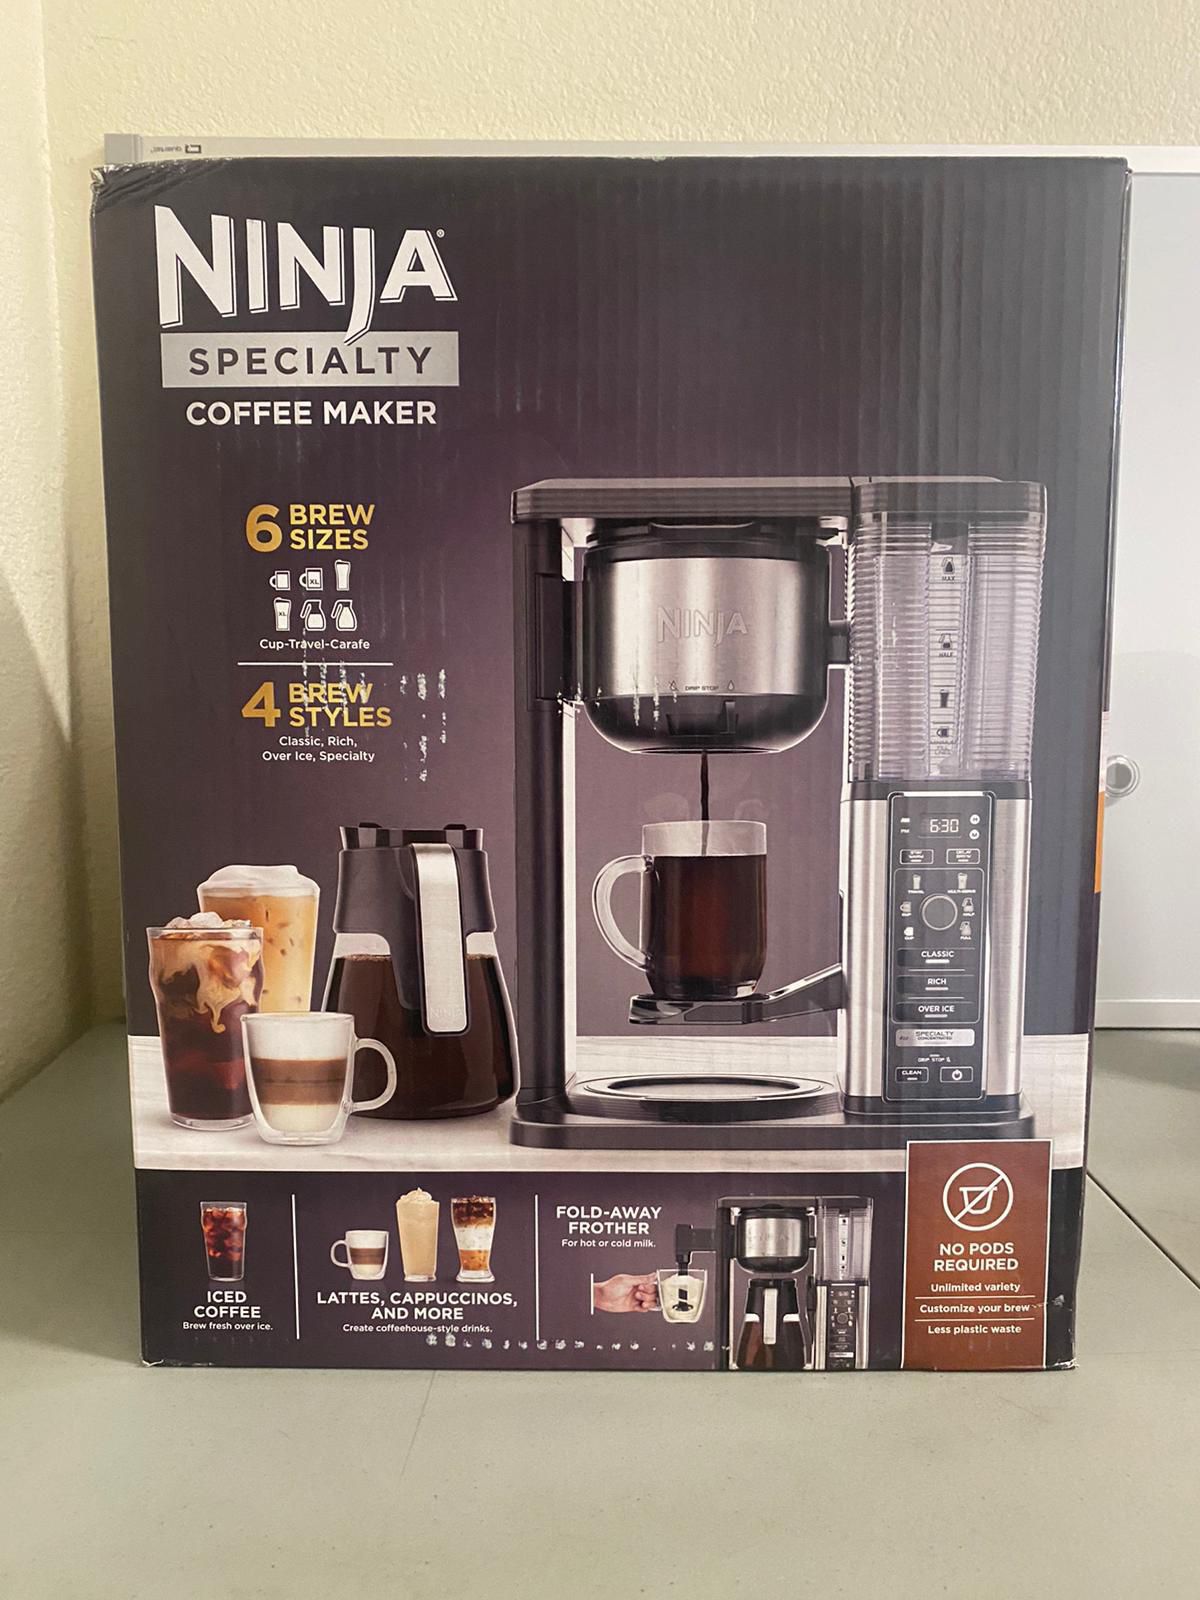 Ninja Specialty Fold-Away Frother Coffee Maker